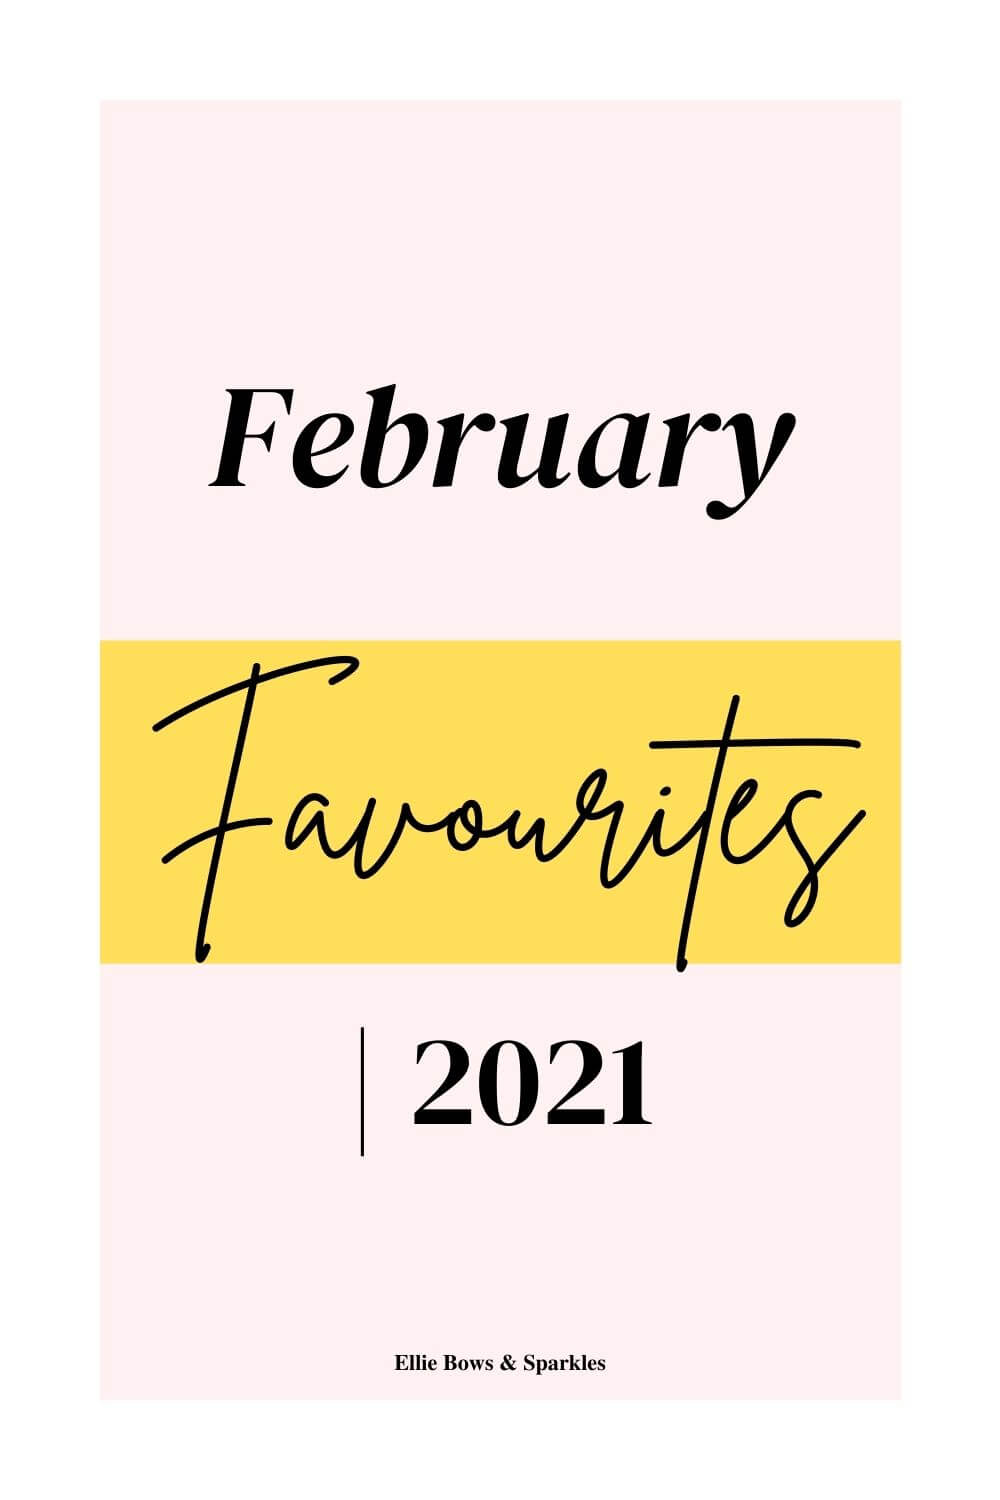 Plain white and pink Pinterest pin, with yellow accent behind the text "favourites", reading February Favourites 2021 in bold and hand written font.